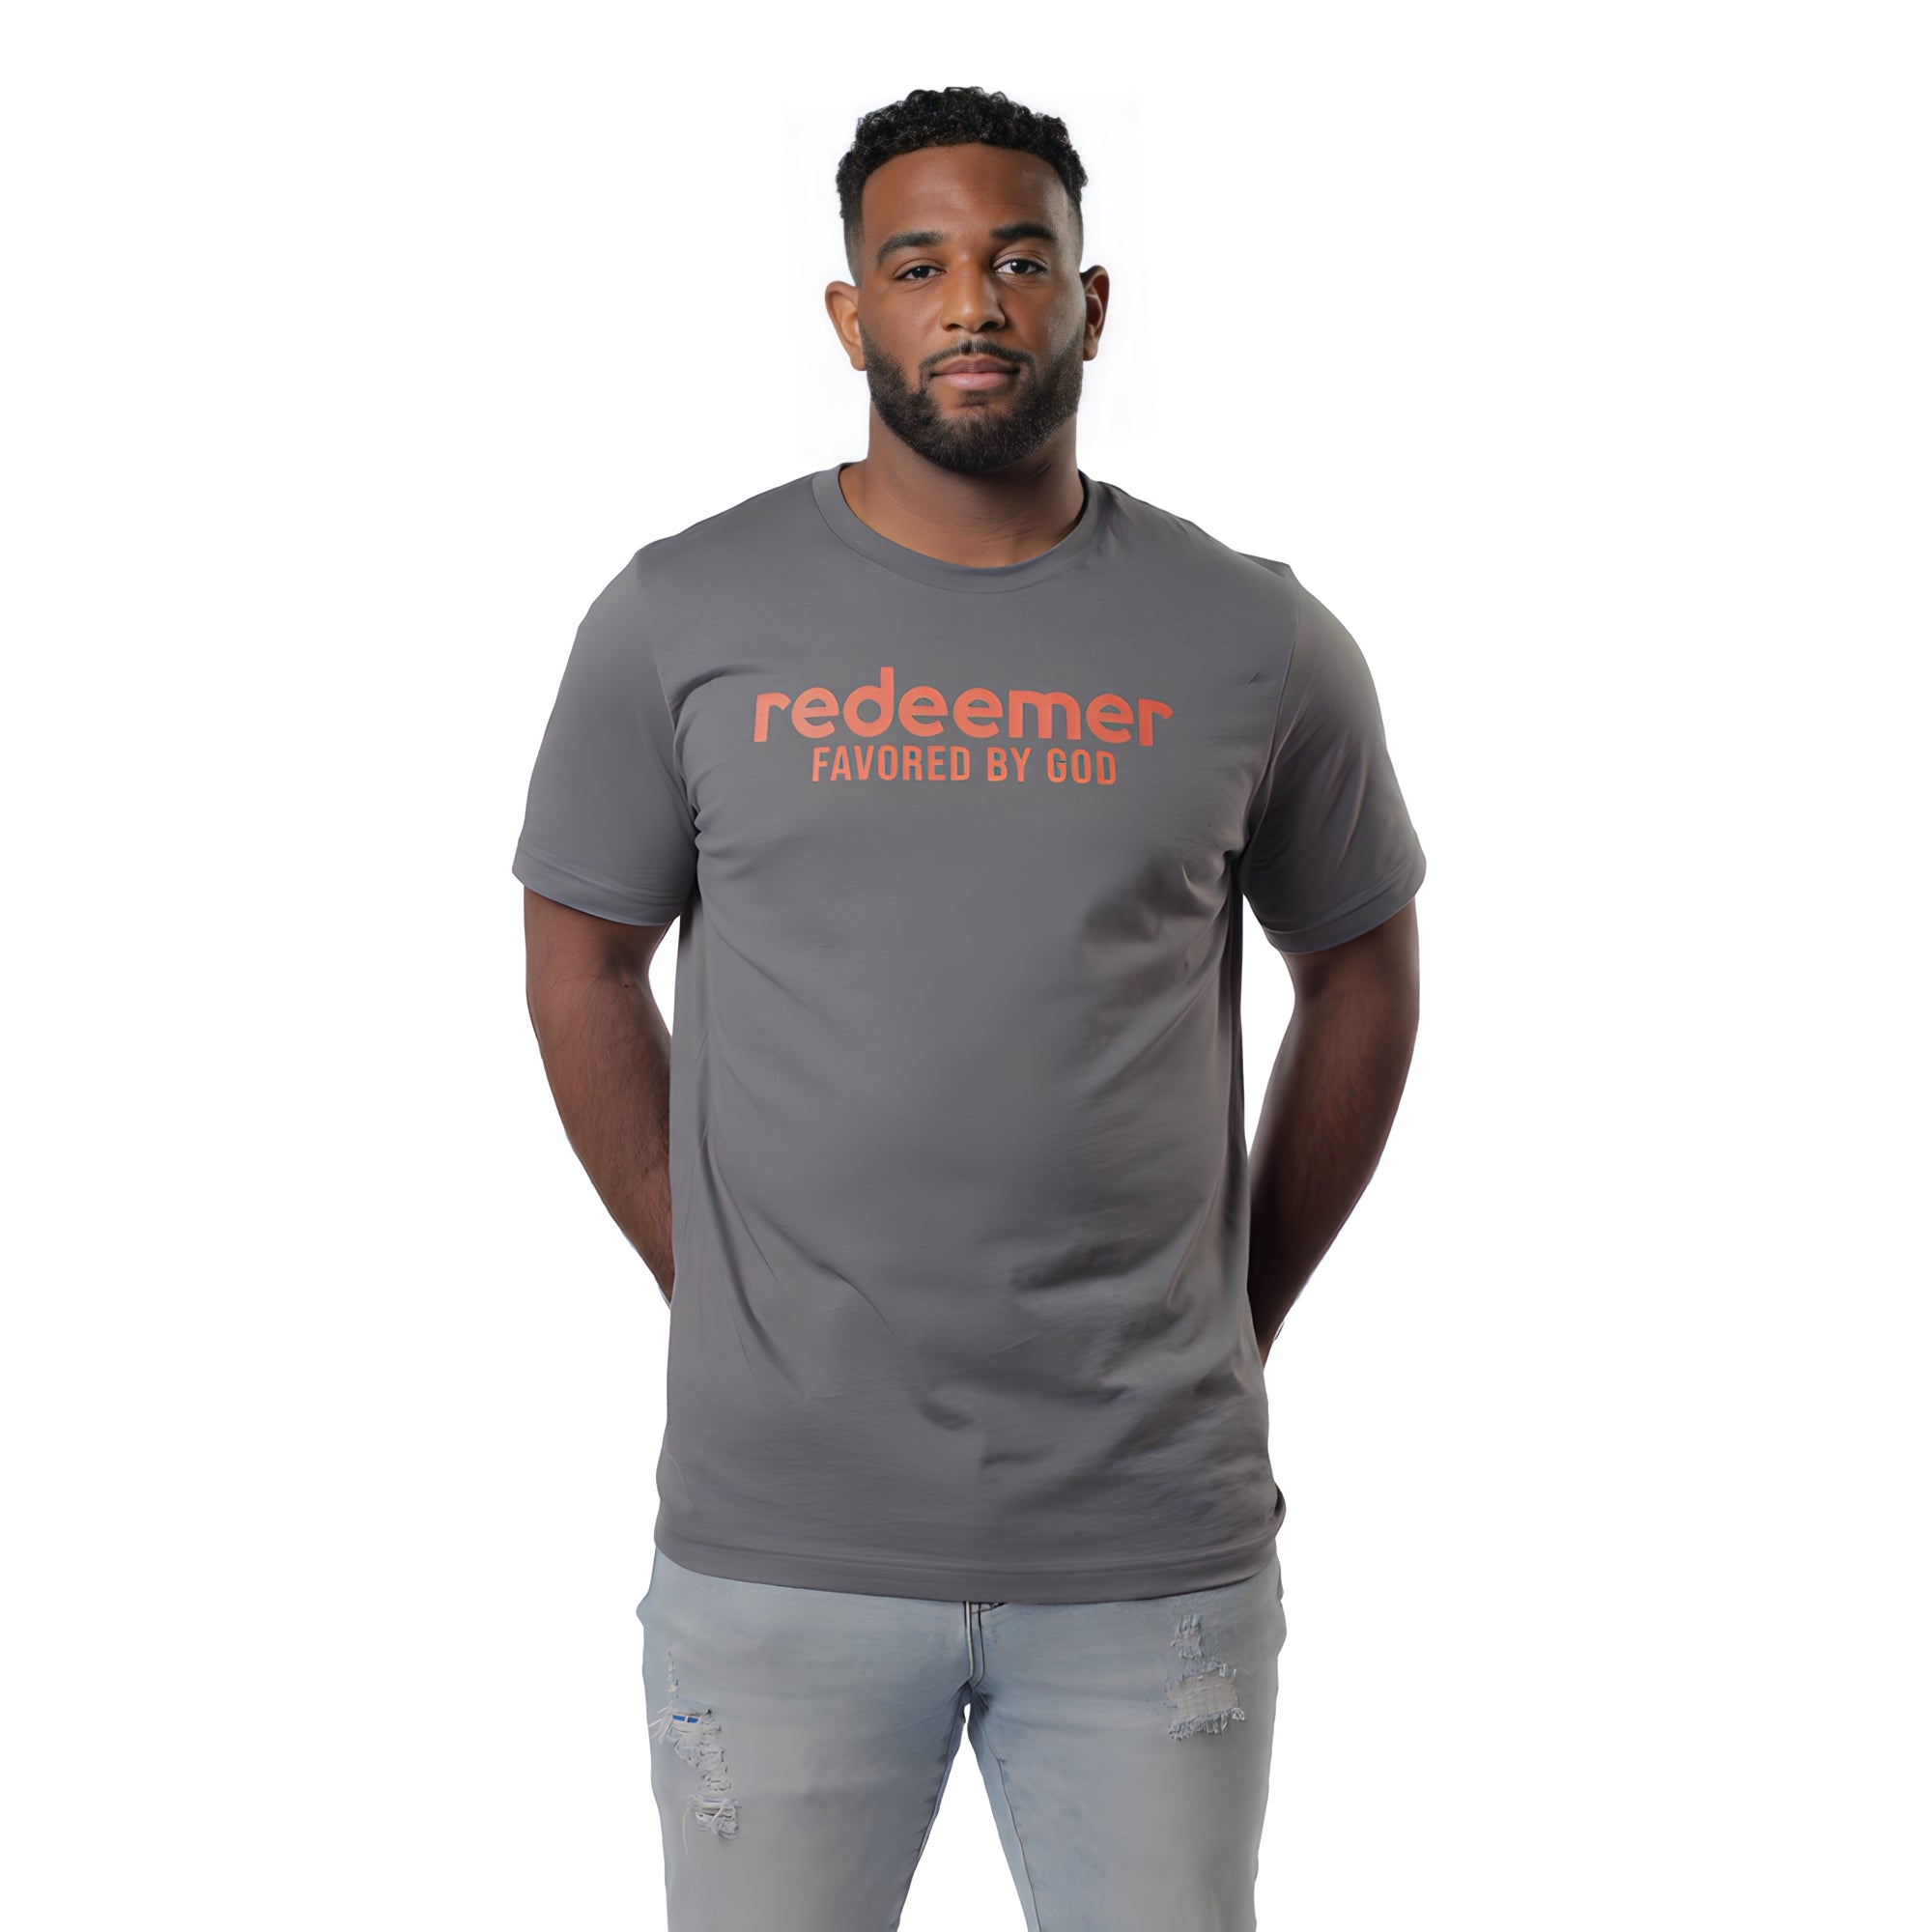 Redeemer Favored By God Tee, Used By God, Used By God Clothing, Christian Apparel, Christian T-Shirts, Christian Shirts, christian t shirts for women, Men's Christian T-Shirt, Christian Clothing, God Shirts, christian clothing t shirts, Christian Sweatshirts, womens christian t shirts, t-shirts about jesus, God Clothing, Jesus Hoodie, Jesus Clothes, God Is Dope, Art Of Homage, Red Letter Clothing, Elevated Faith, Beacon Threads, God The Father Apparel